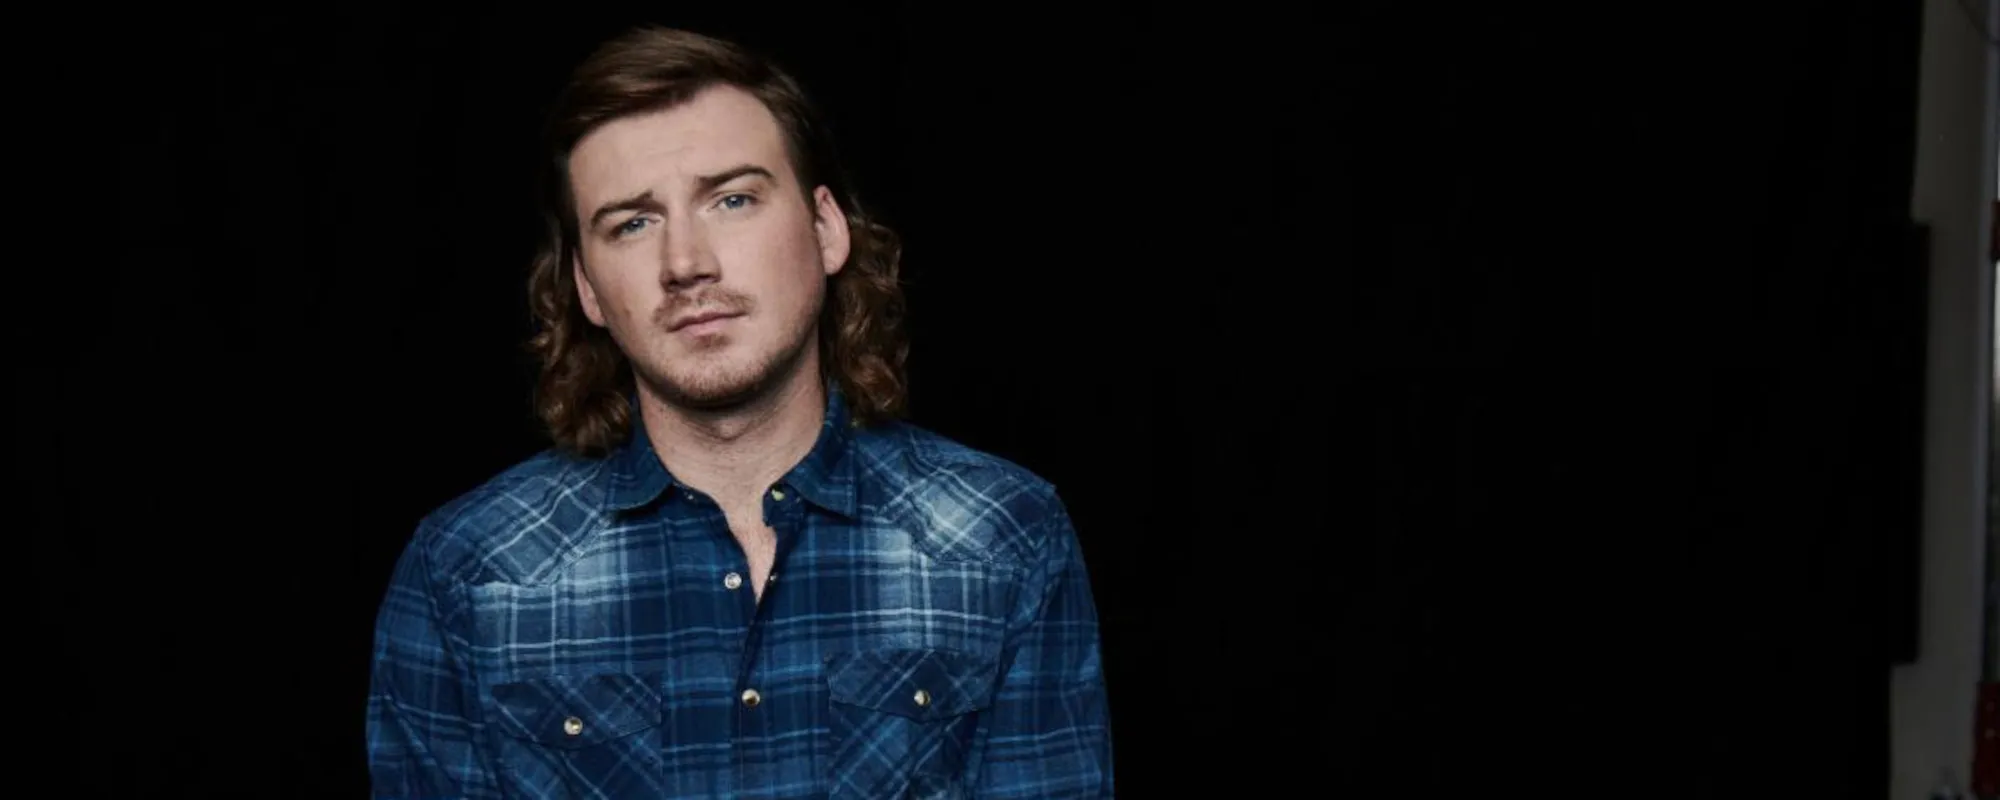 The Meaning Behind “Whiskey Glasses” by Morgan Wallen